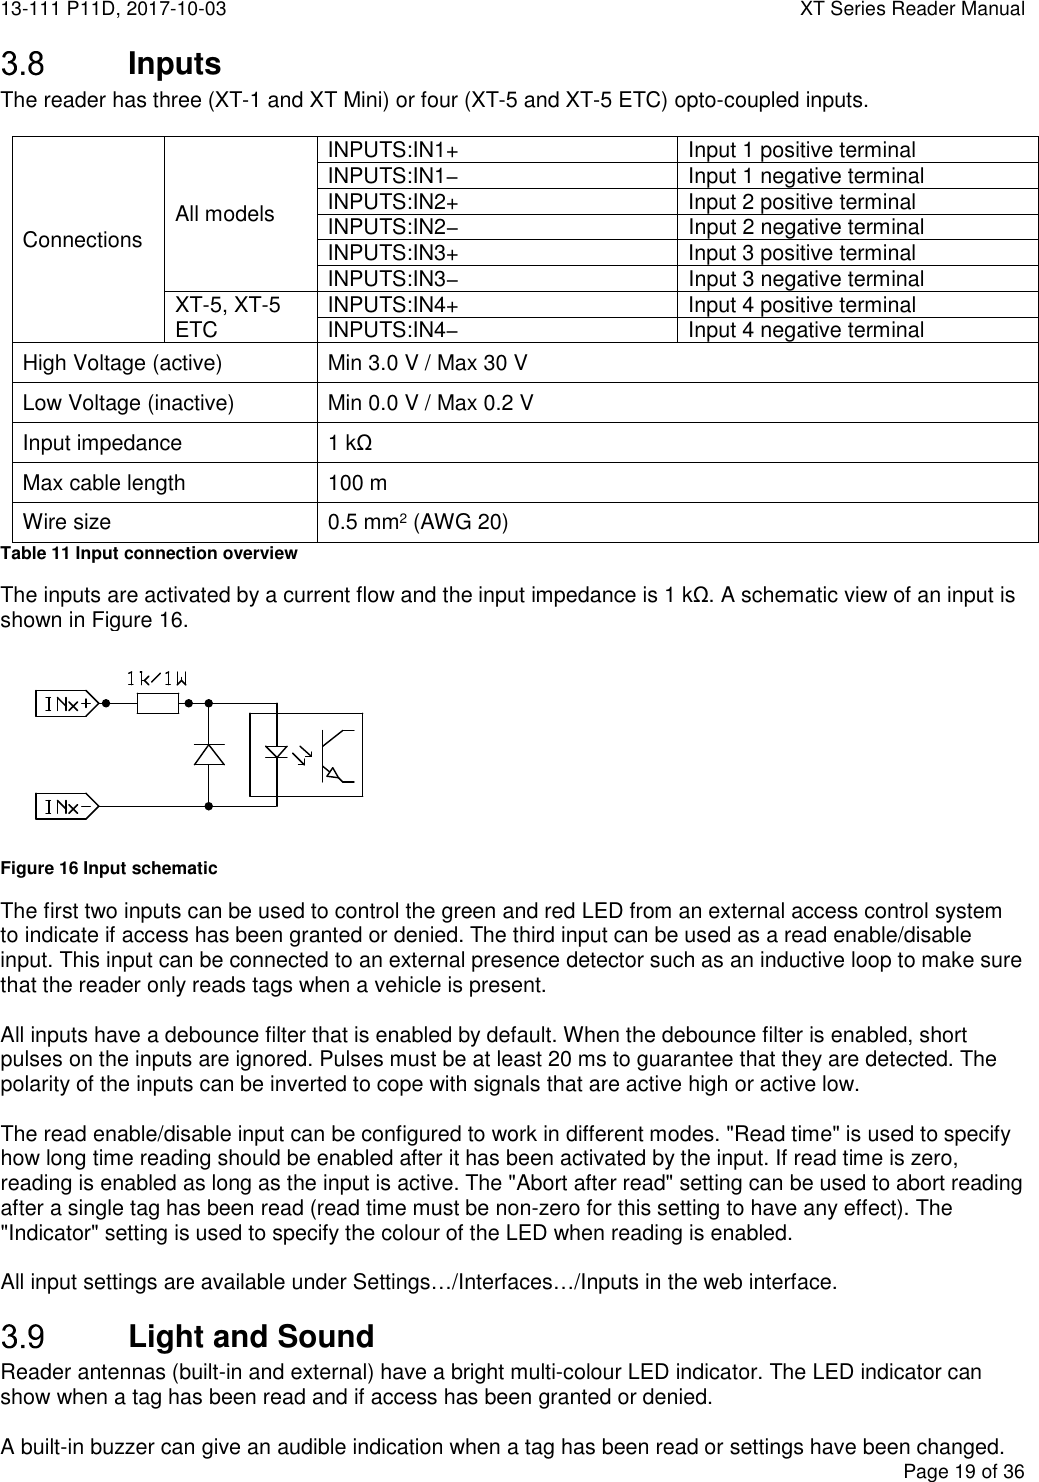 13-111 P11D, 2017-10-03  XT Series Reader Manual  Page 19 of 36   Inputs The reader has three (XT-1 and XT Mini) or four (XT-5 and XT-5 ETC) opto-coupled inputs.   Connections  All models INPUTS:IN1+ Input 1 positive terminal INPUTS:IN1− Input 1 negative terminal INPUTS:IN2+ Input 2 positive terminal INPUTS:IN2−  Input 2 negative terminal INPUTS:IN3+ Input 3 positive terminal INPUTS:IN3−  Input 3 negative terminal XT-5, XT-5 ETC INPUTS:IN4+ Input 4 positive terminal INPUTS:IN4− Input 4 negative terminal High Voltage (active)  Min 3.0 V / Max 30 V Low Voltage (inactive)  Min 0.0 V / Max 0.2 V Input impedance  1 kΩ Max cable length  100 m Wire size  0.5 mm2 (AWG 20) Table 11 Input connection overview The inputs are activated by a current flow and the input impedance is 1 kΩ. A schematic view of an input is shown in Figure 16.  Figure 16 Input schematic The first two inputs can be used to control the green and red LED from an external access control system to indicate if access has been granted or denied. The third input can be used as a read enable/disable input. This input can be connected to an external presence detector such as an inductive loop to make sure that the reader only reads tags when a vehicle is present.  All inputs have a debounce filter that is enabled by default. When the debounce filter is enabled, short pulses on the inputs are ignored. Pulses must be at least 20 ms to guarantee that they are detected. The polarity of the inputs can be inverted to cope with signals that are active high or active low.  The read enable/disable input can be configured to work in different modes. &quot;Read time&quot; is used to specify how long time reading should be enabled after it has been activated by the input. If read time is zero, reading is enabled as long as the input is active. The &quot;Abort after read&quot; setting can be used to abort reading after a single tag has been read (read time must be non-zero for this setting to have any effect). The &quot;Indicator&quot; setting is used to specify the colour of the LED when reading is enabled.  All input settings are available under Settings…/Interfaces…/Inputs in the web interface.  Light and Sound Reader antennas (built-in and external) have a bright multi-colour LED indicator. The LED indicator can show when a tag has been read and if access has been granted or denied.  A built-in buzzer can give an audible indication when a tag has been read or settings have been changed. 